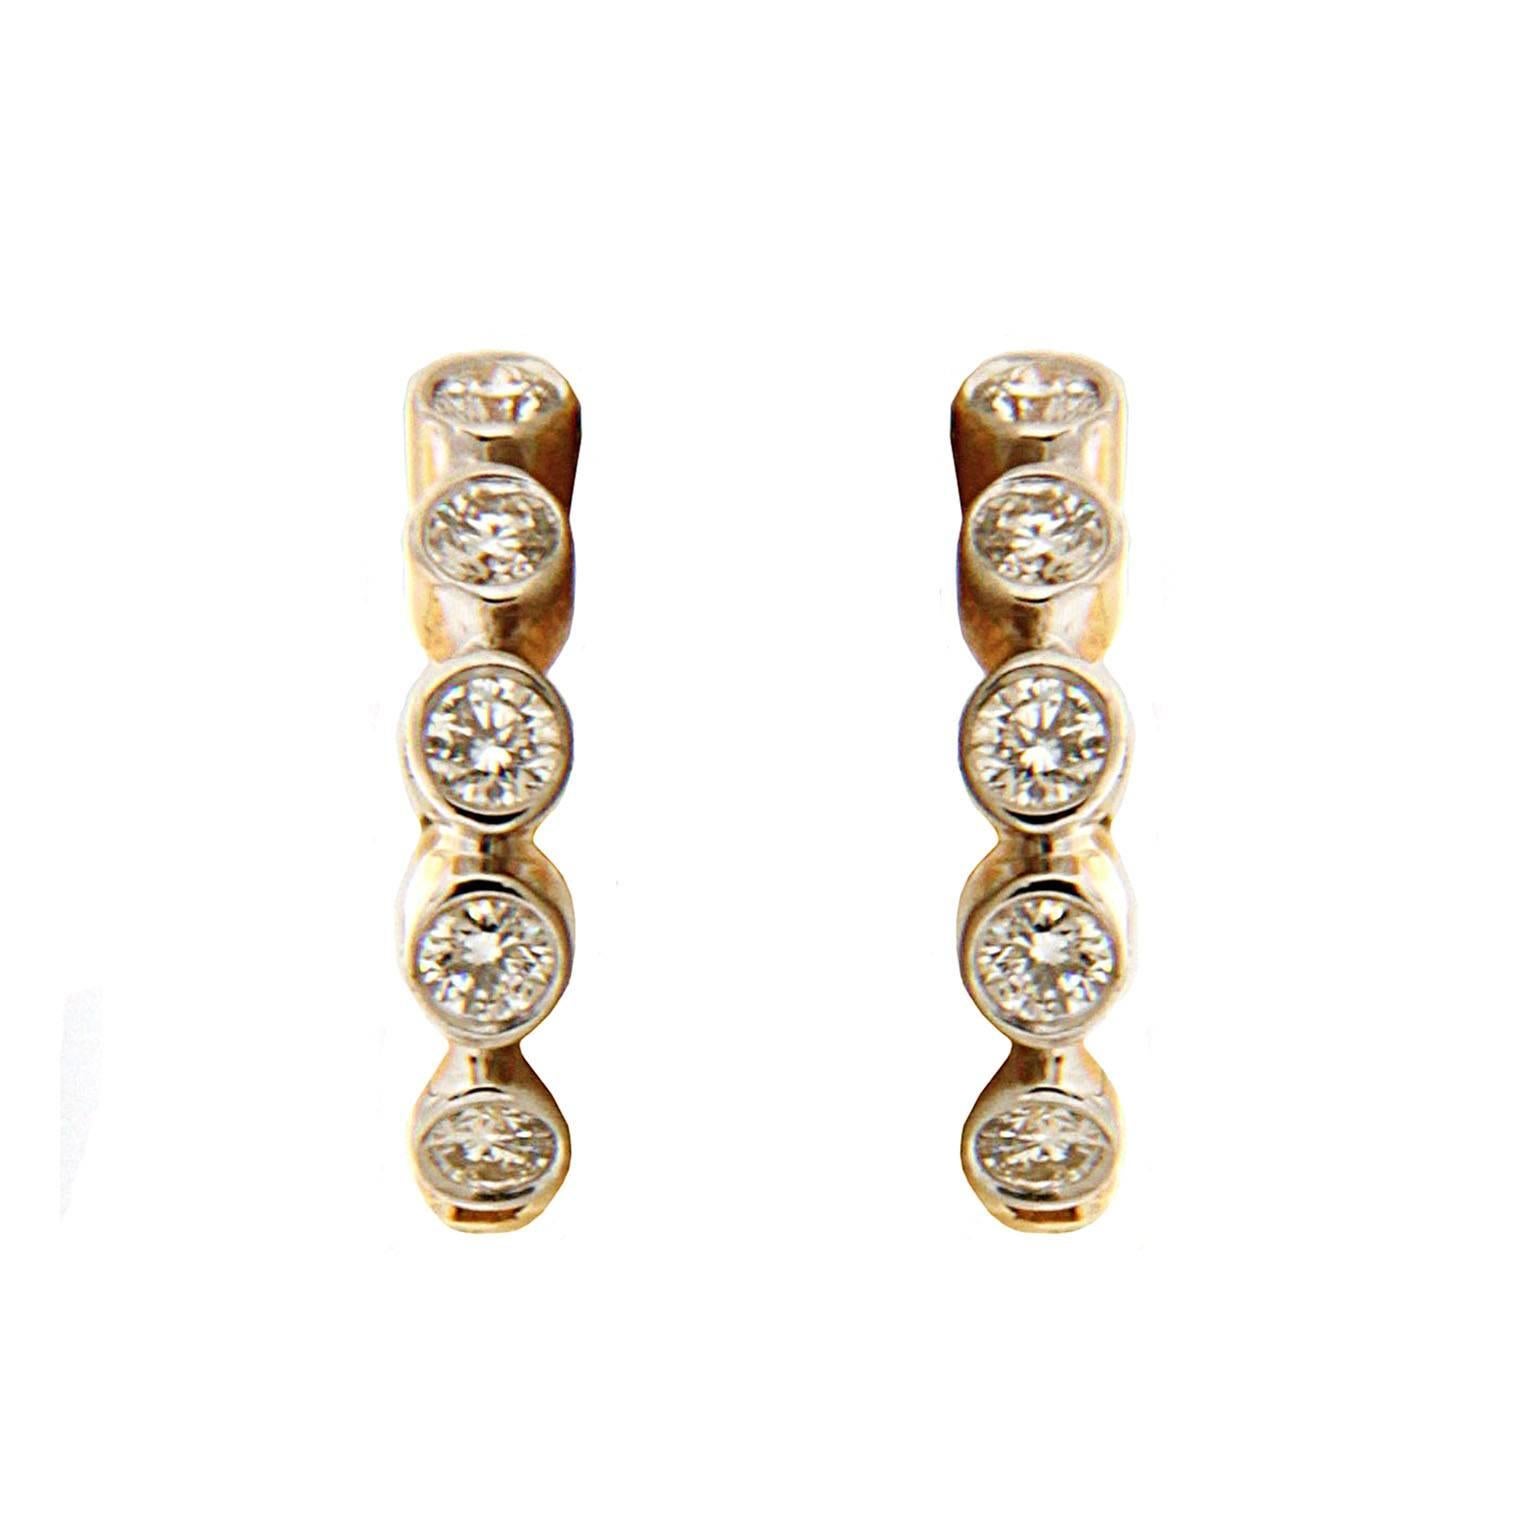 These hoop earrings are made in 18kt yellow gold they feature 0.24 carat total weight of round brilliant diamonds.